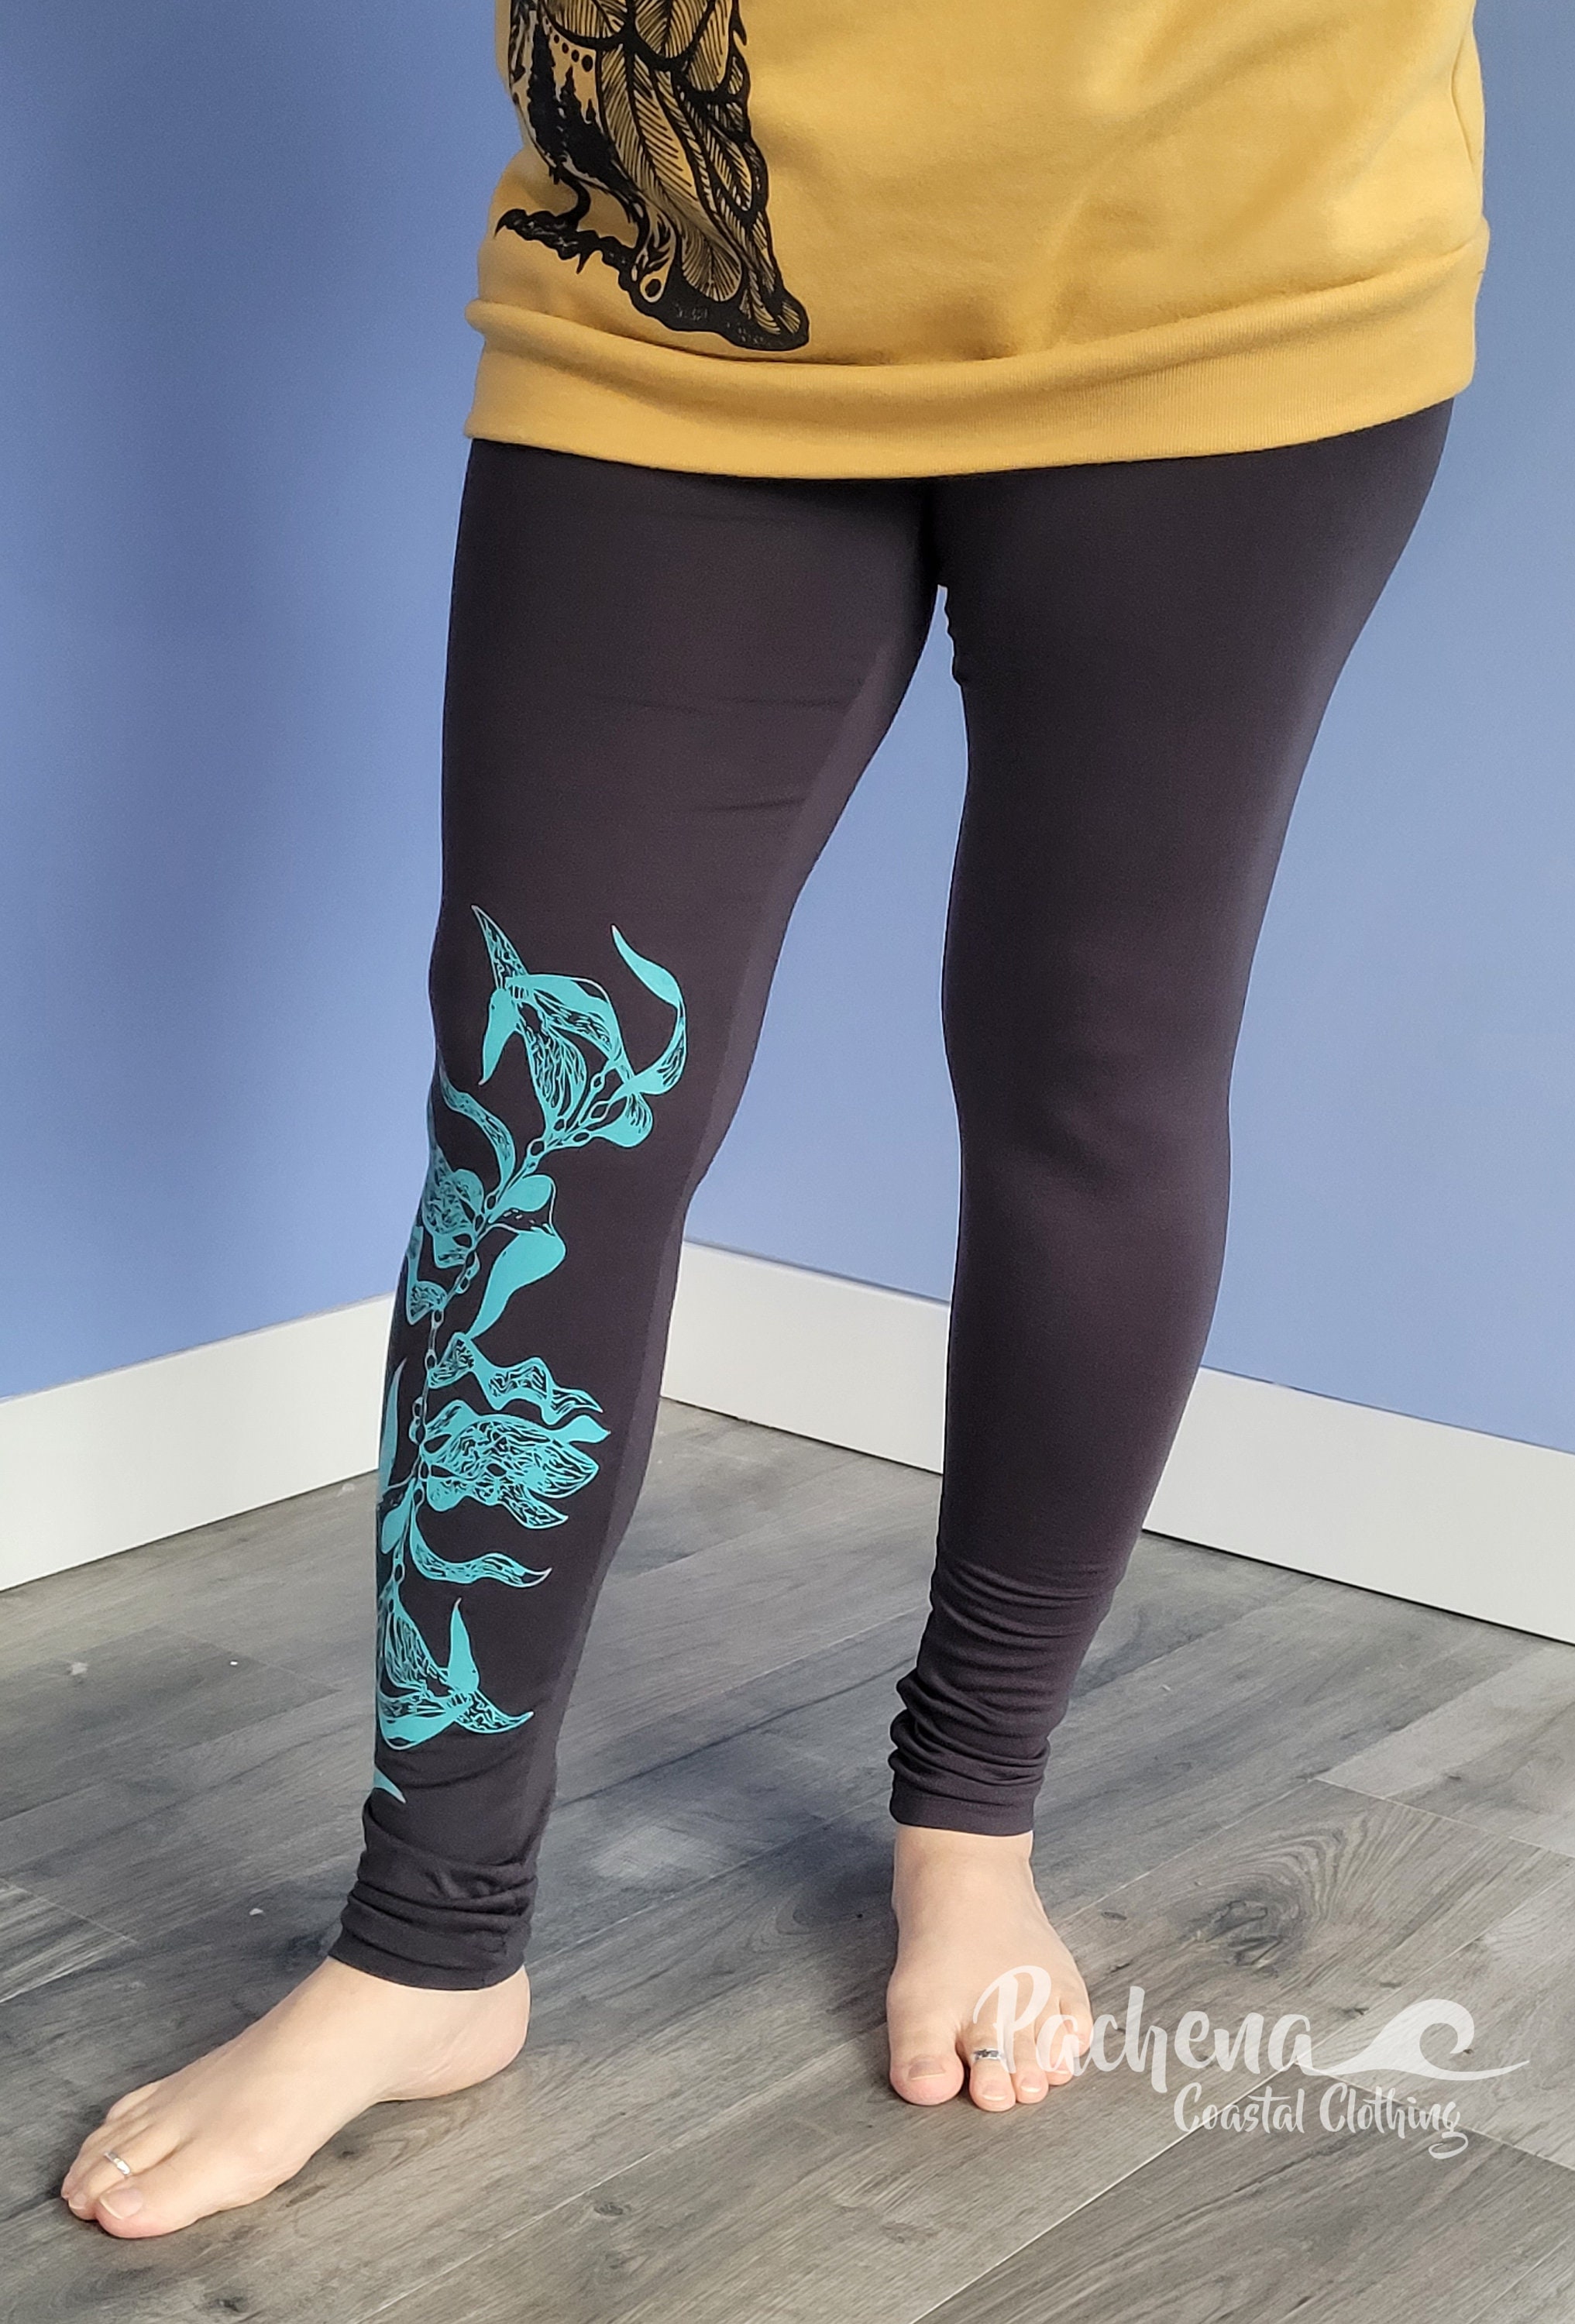 Buy Pachena, Clothing, Fashion, Design, Ladies, Bamboo, Leggings, Featuring  UNDER THE SEA by Pachenaclothing, Made in Canada, Online in India 